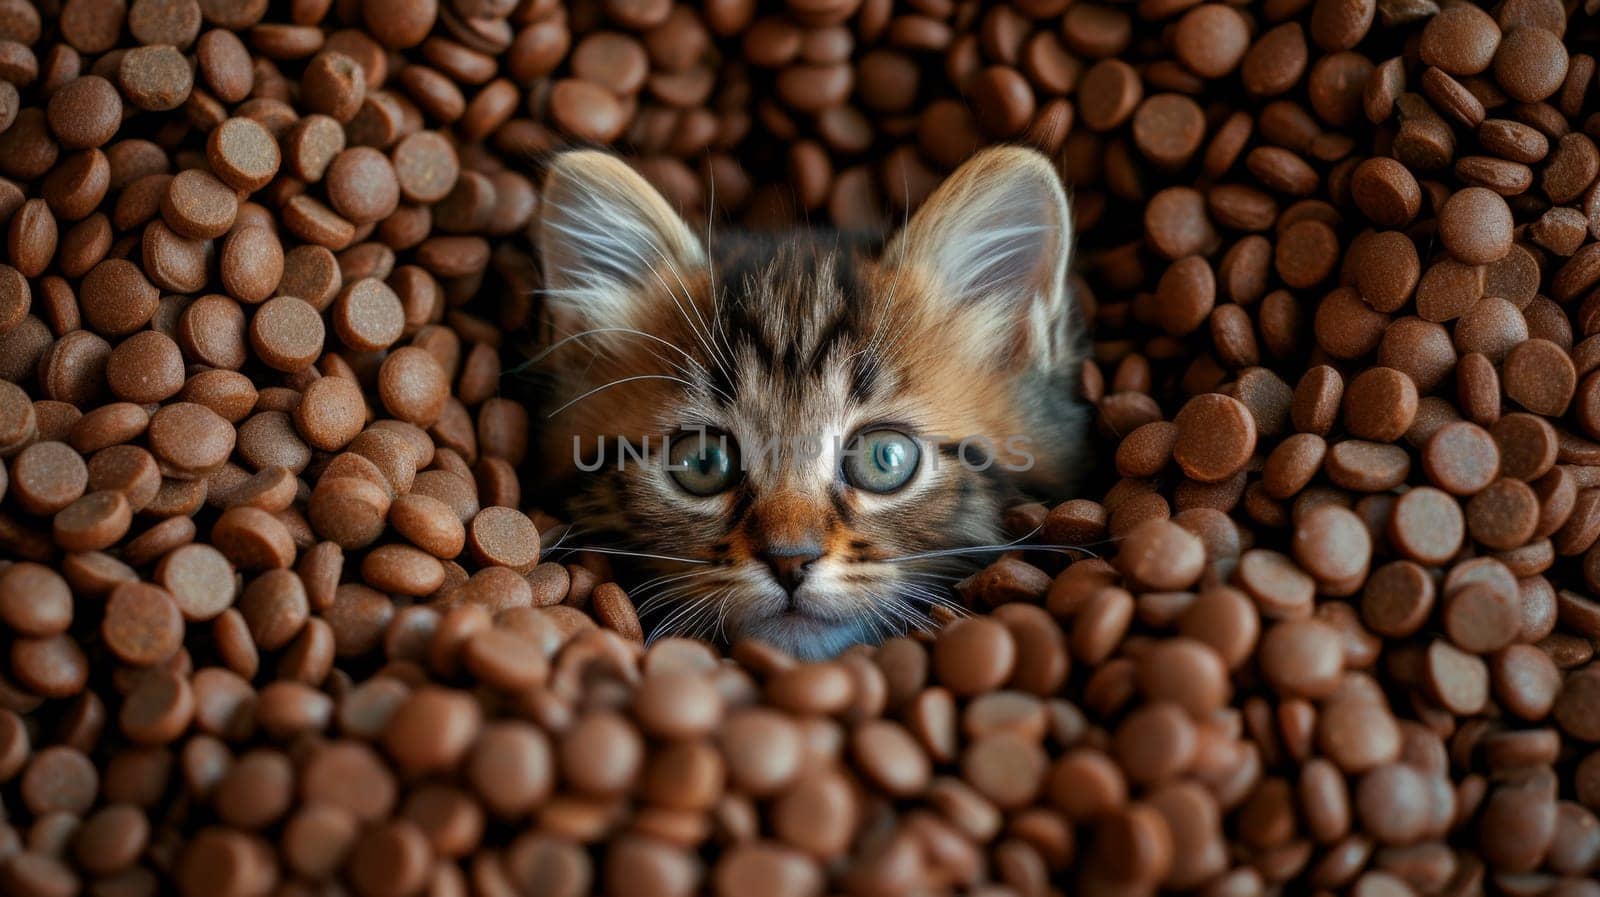 A kitten peeking out from a pile of chocolate beans